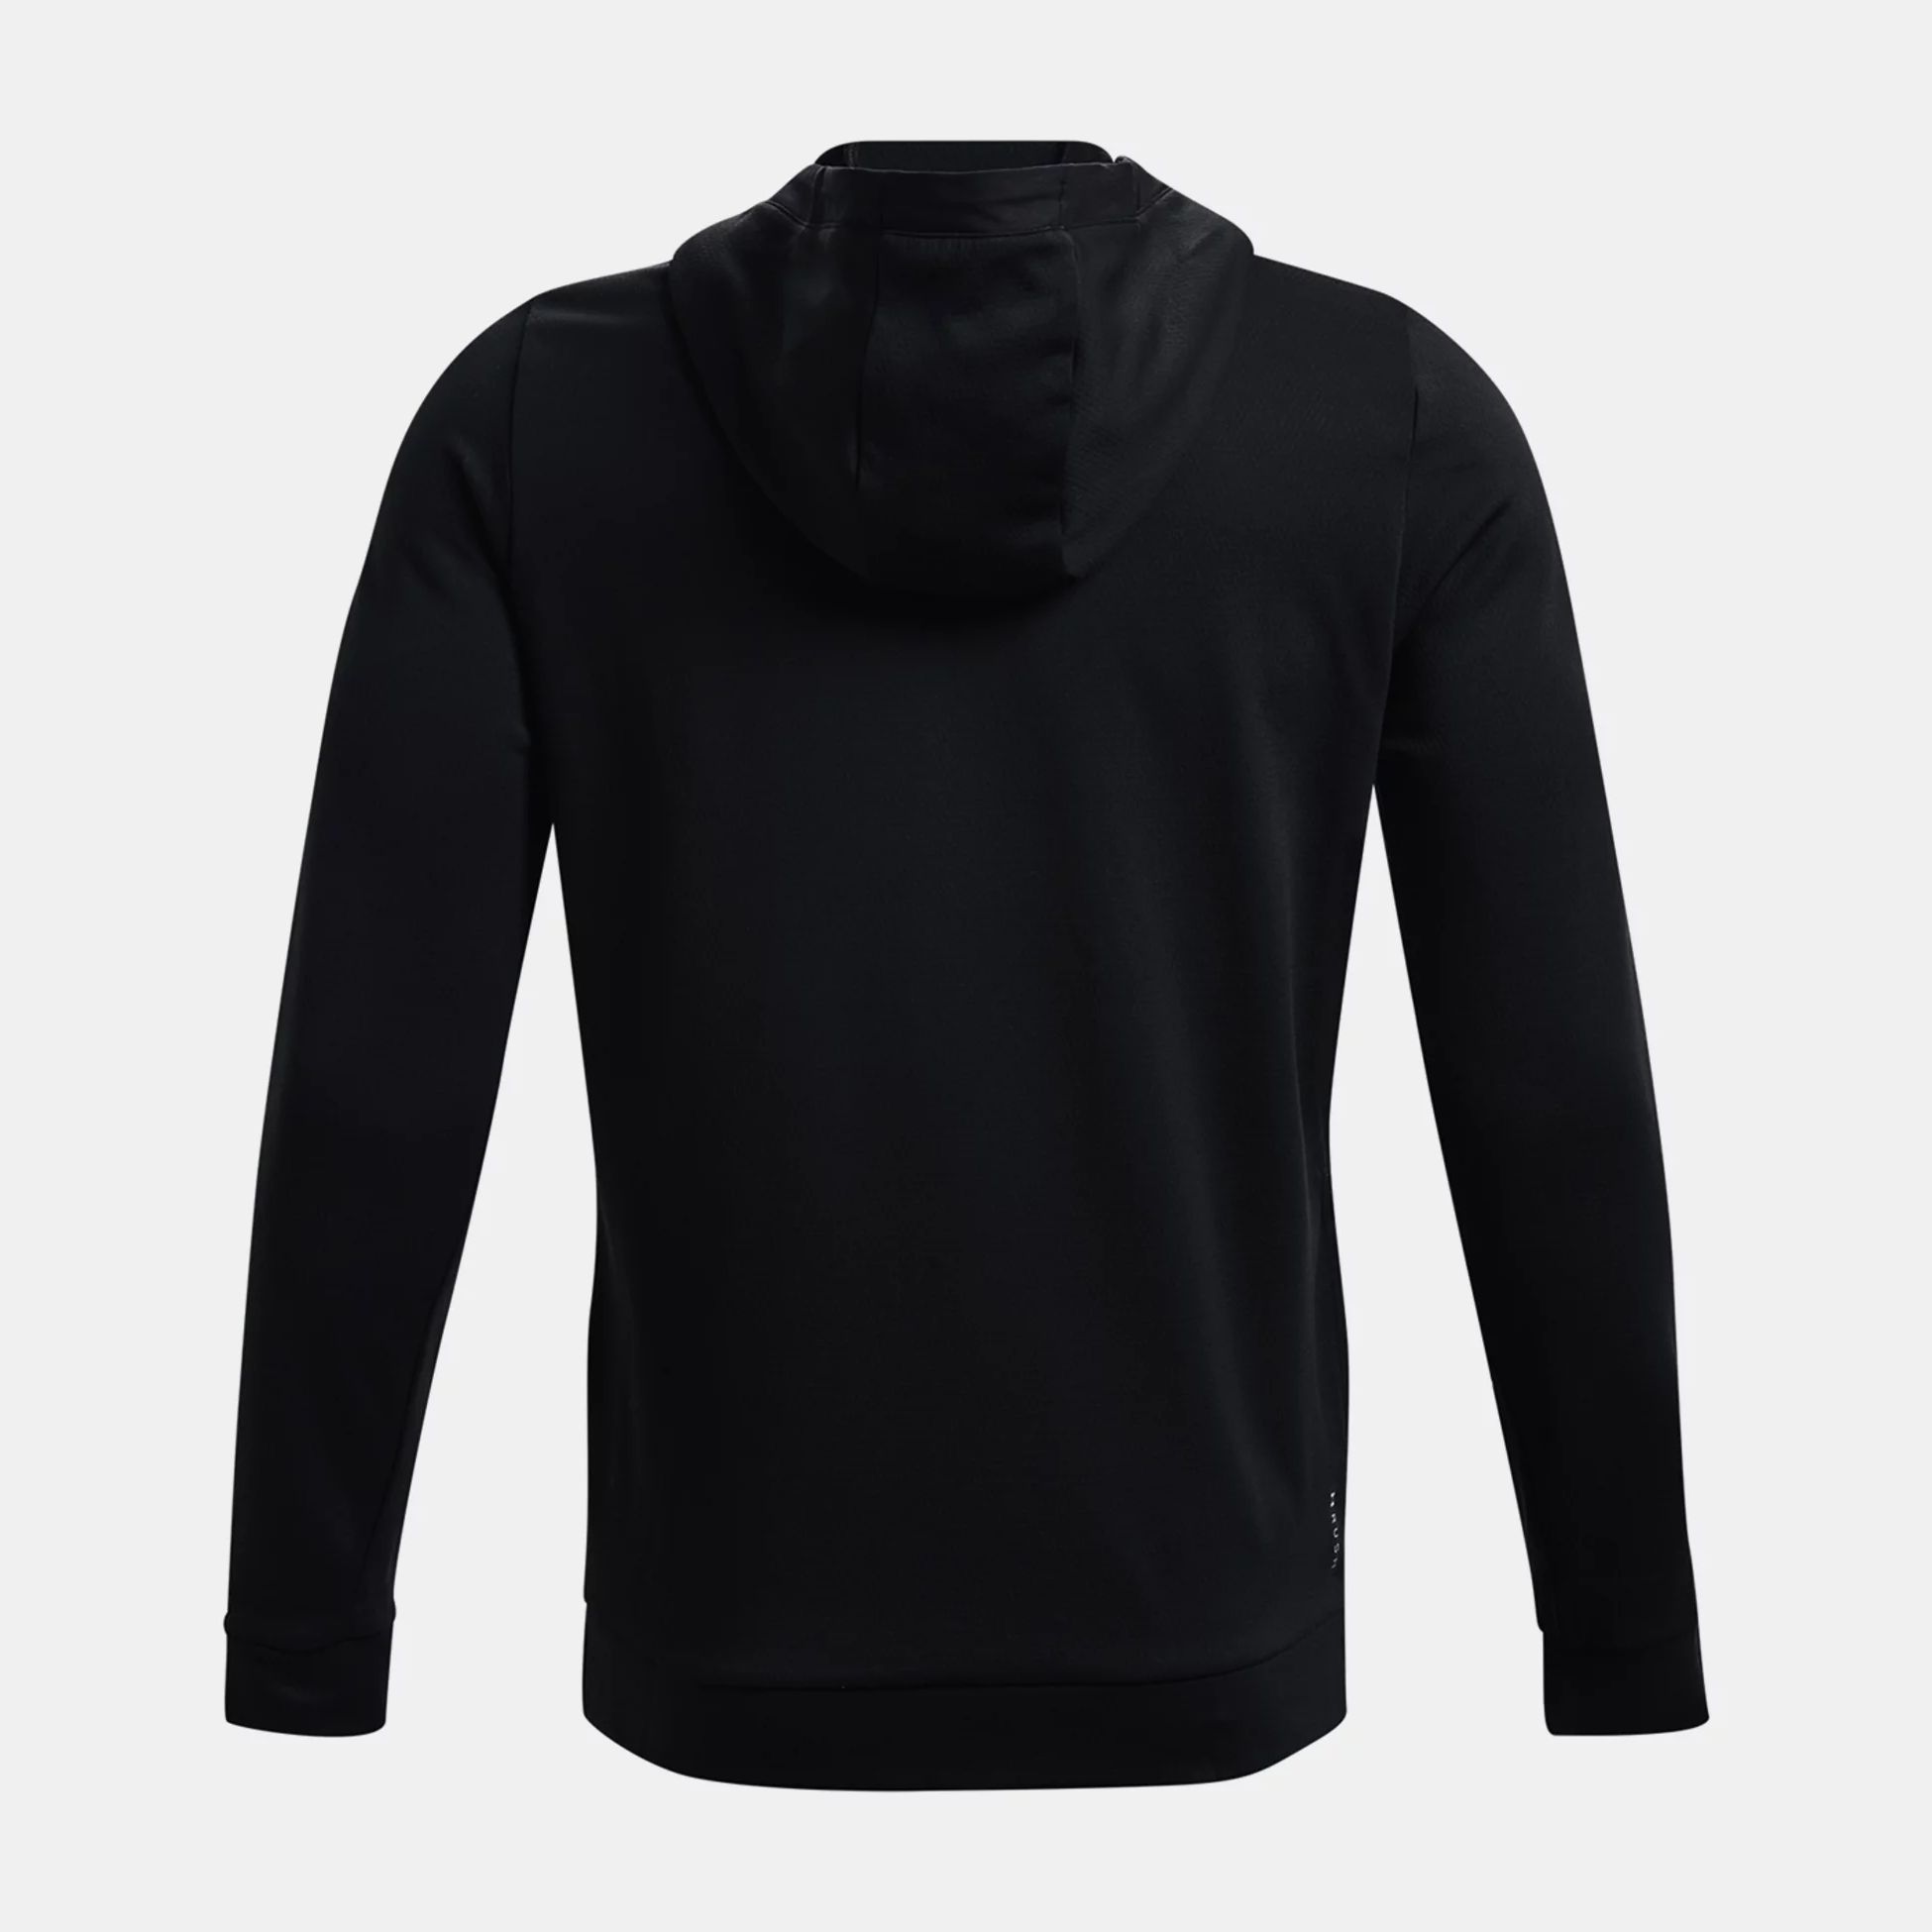 Clothing -  under armour RUSH Warm-Up Full-Zip Hoodie